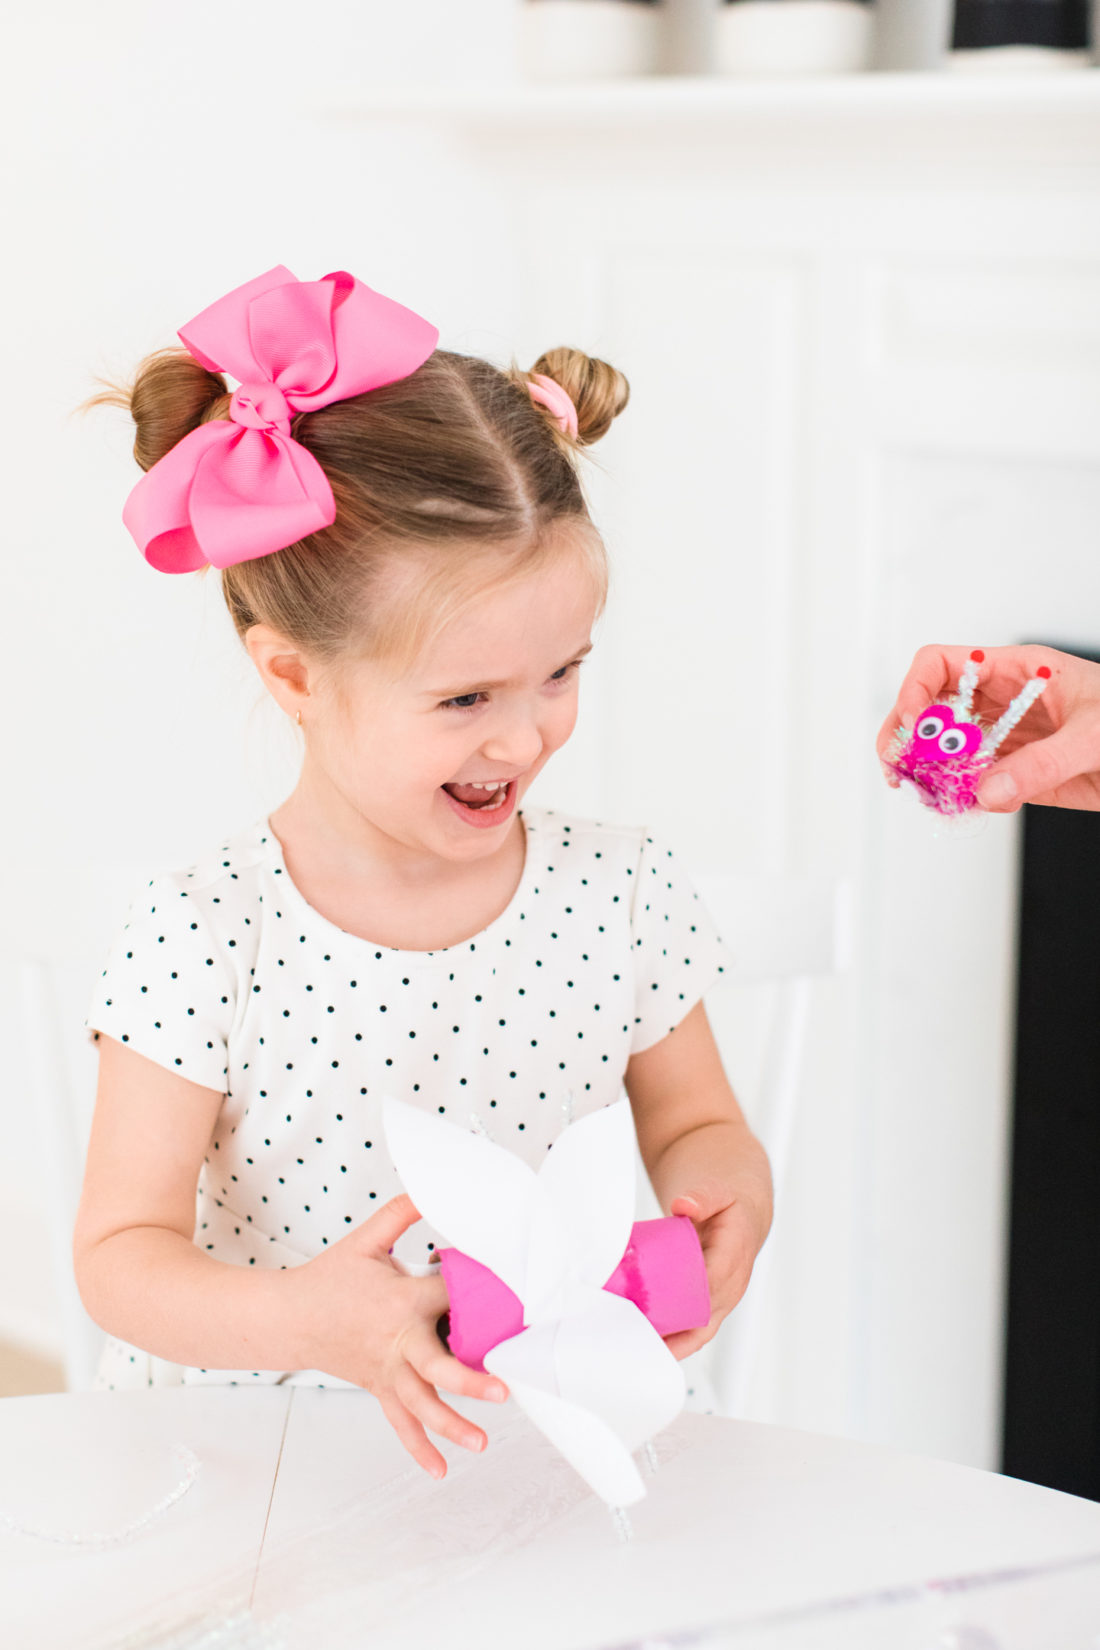 Marlowe Martino has fun crafting DIY Lovebugs for Valentine's Day at her kitchen table